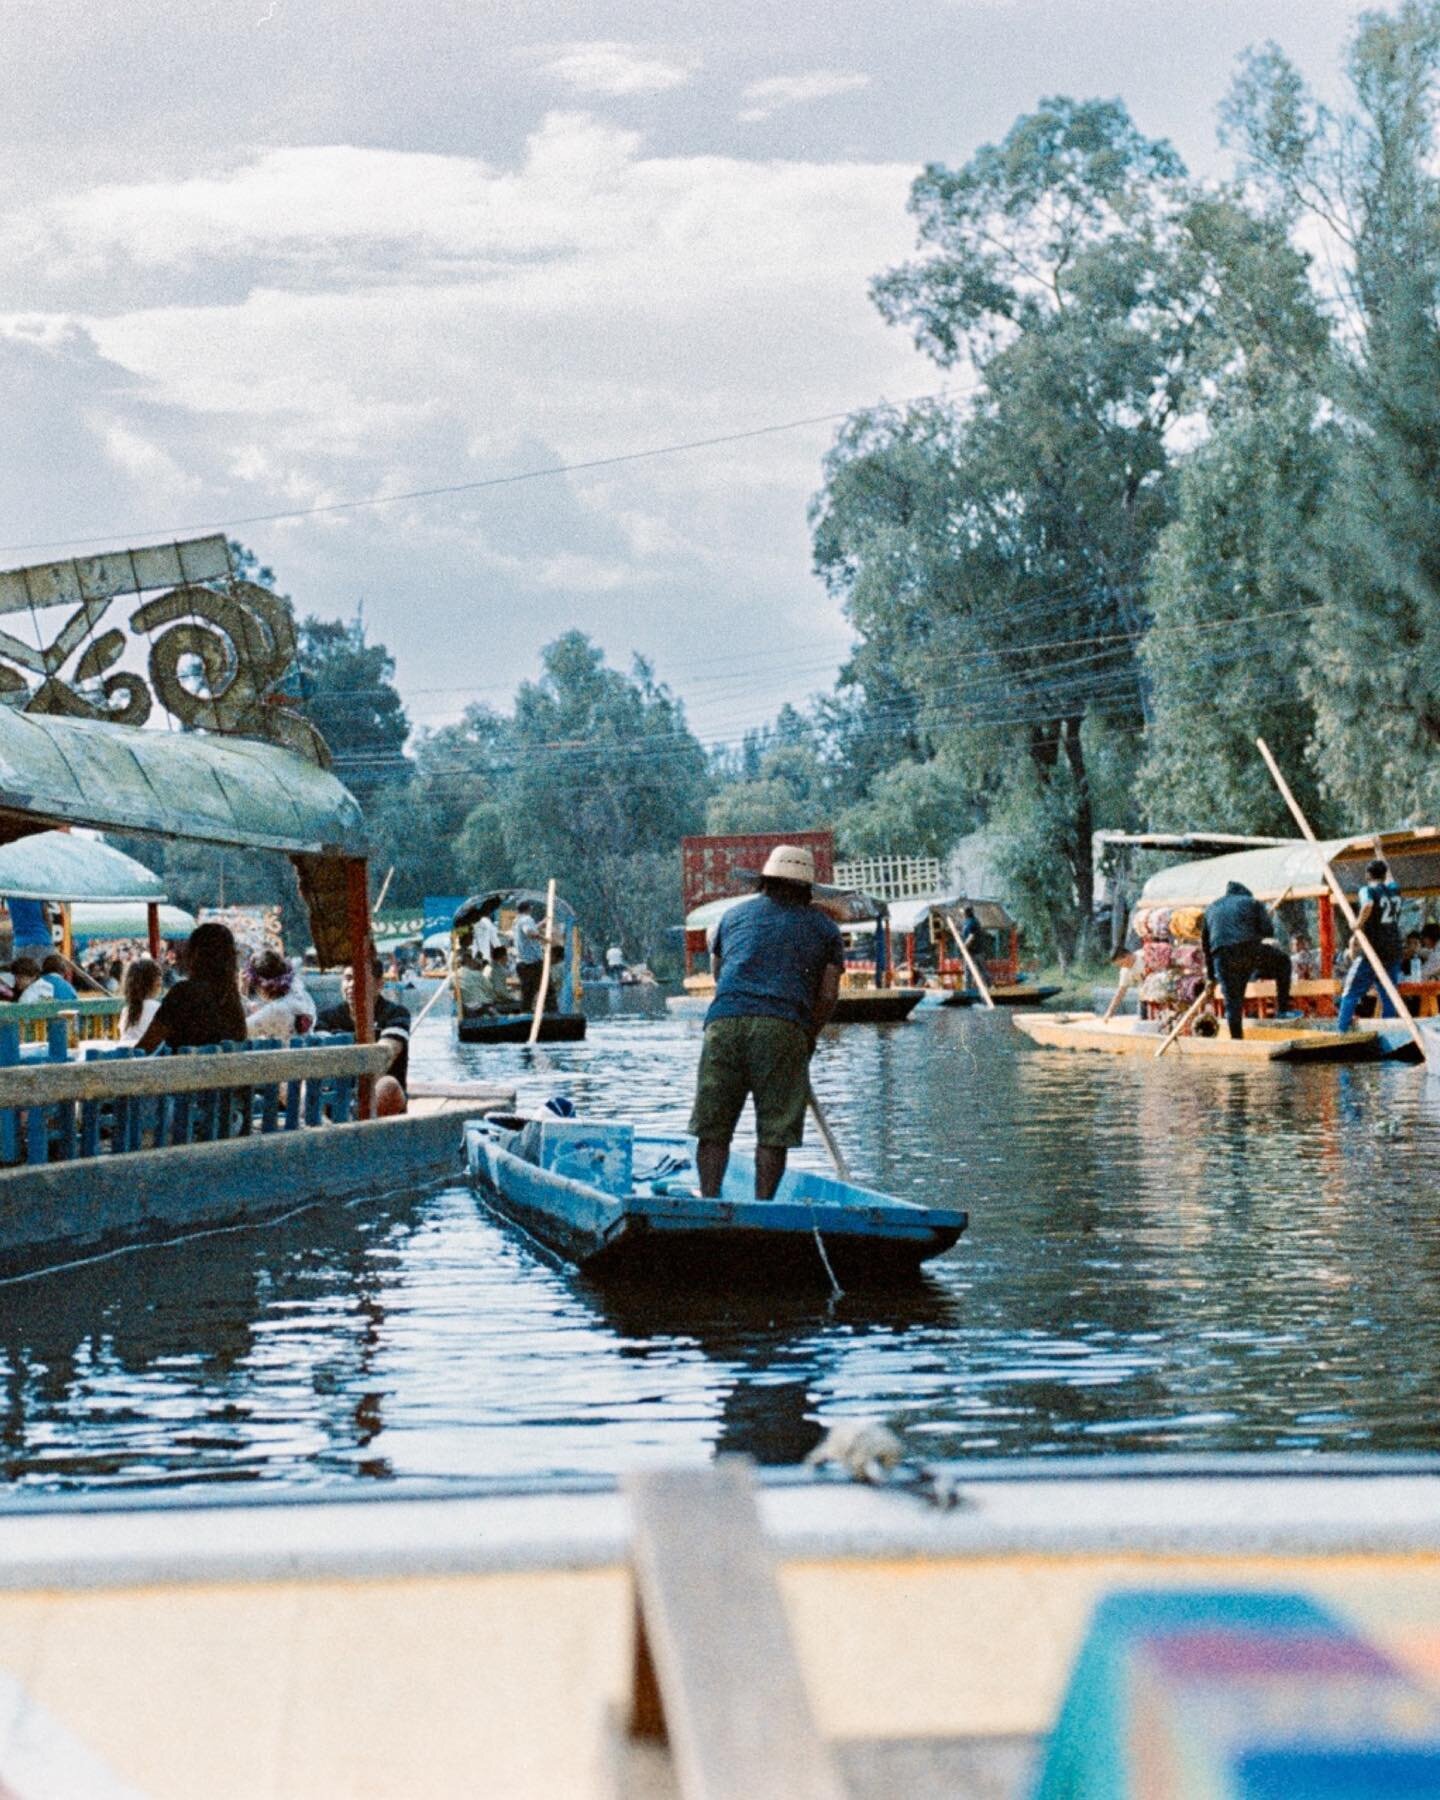 xochimilco!

New 35mm film from @lomography ! Shot 36 frames in Mexico City with Lomochrome &lsquo;92. A new film stock formula with retro characteristics, heavy grain, and a cool color temperature. 

Film is on sale on Lomographys website. Thanks to